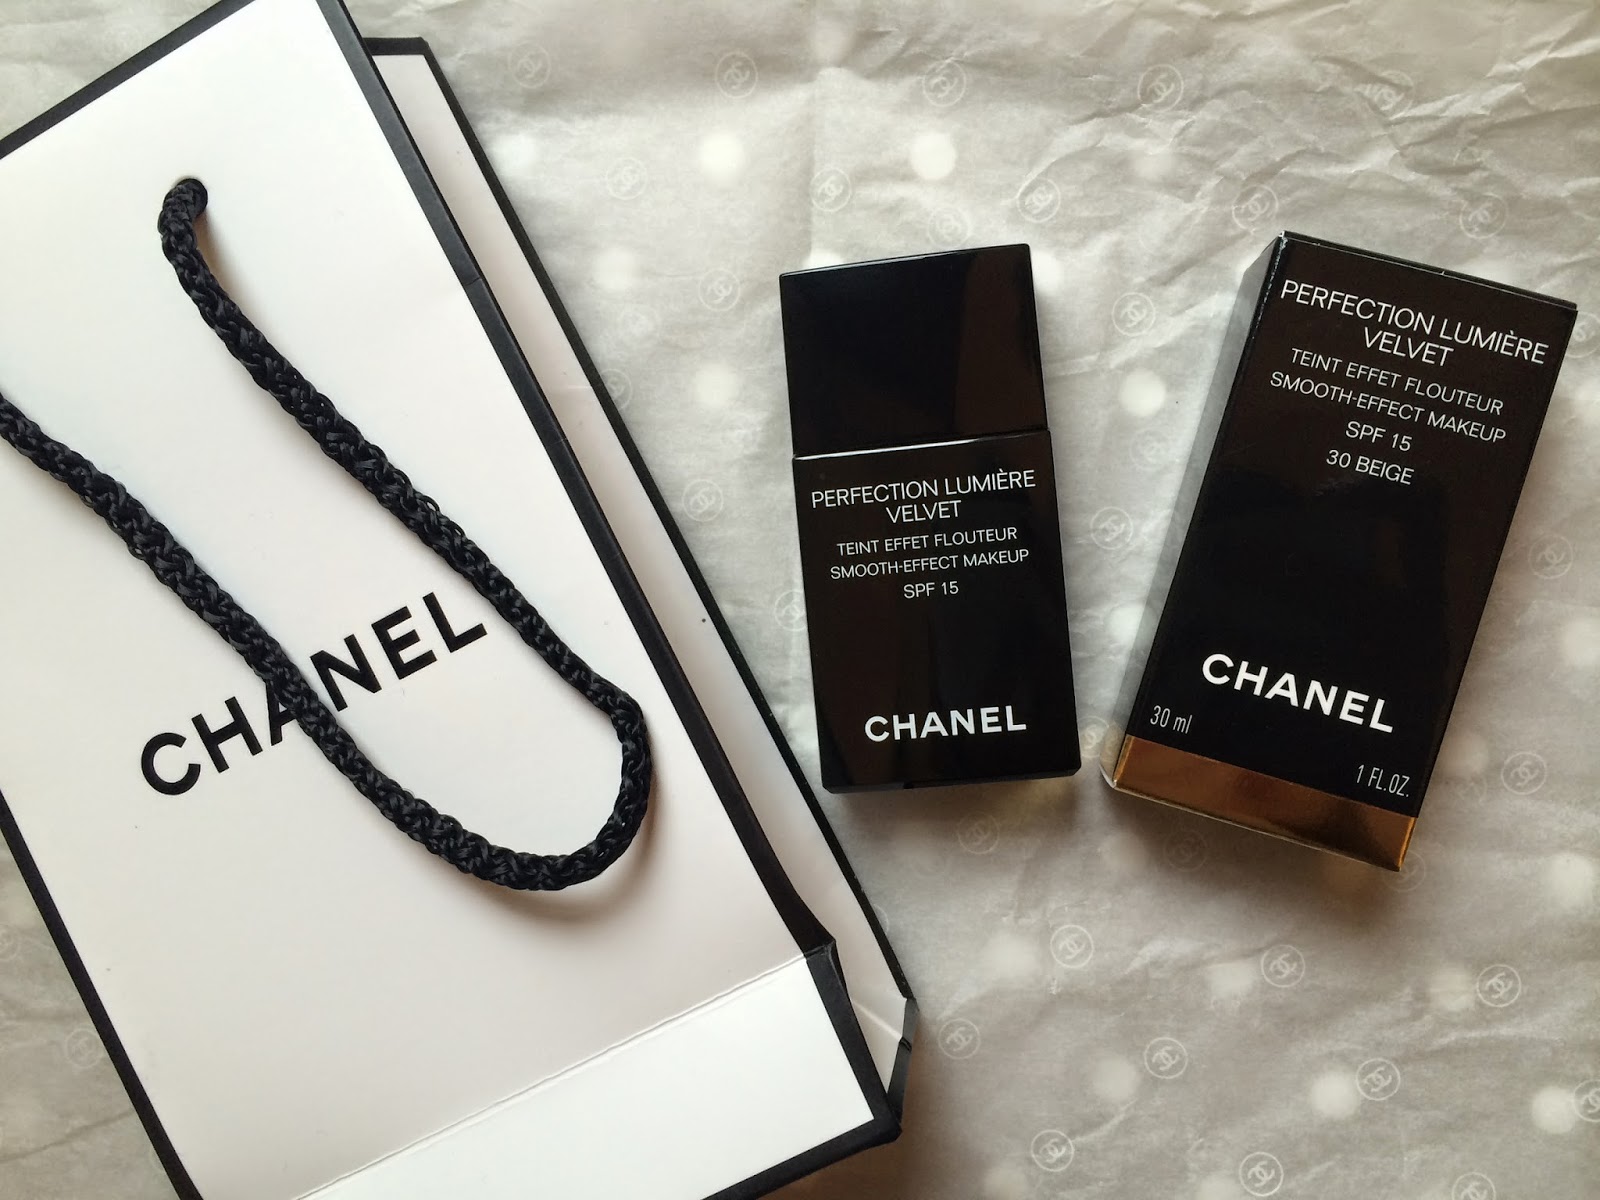 chanel business flap